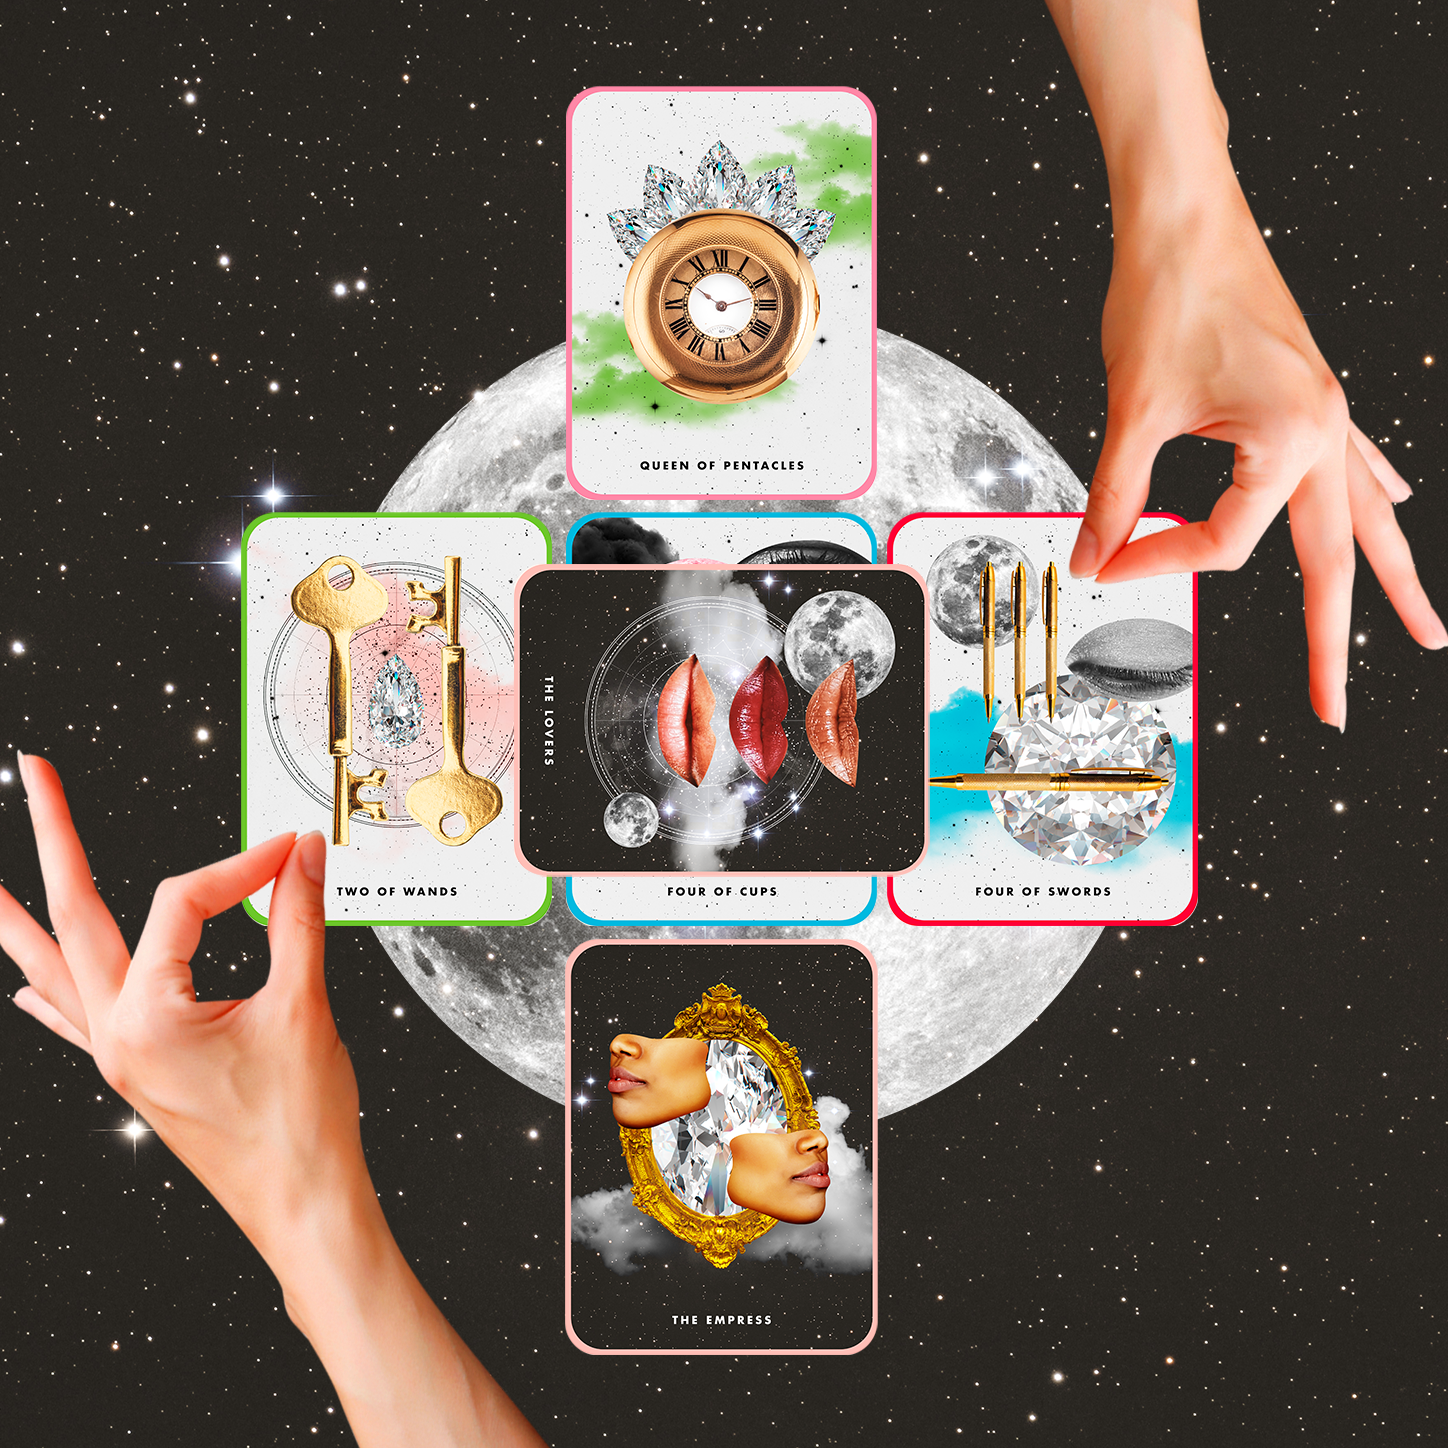 Your Weekly Tarot Card Reading Is Telling You to Put Yourself First